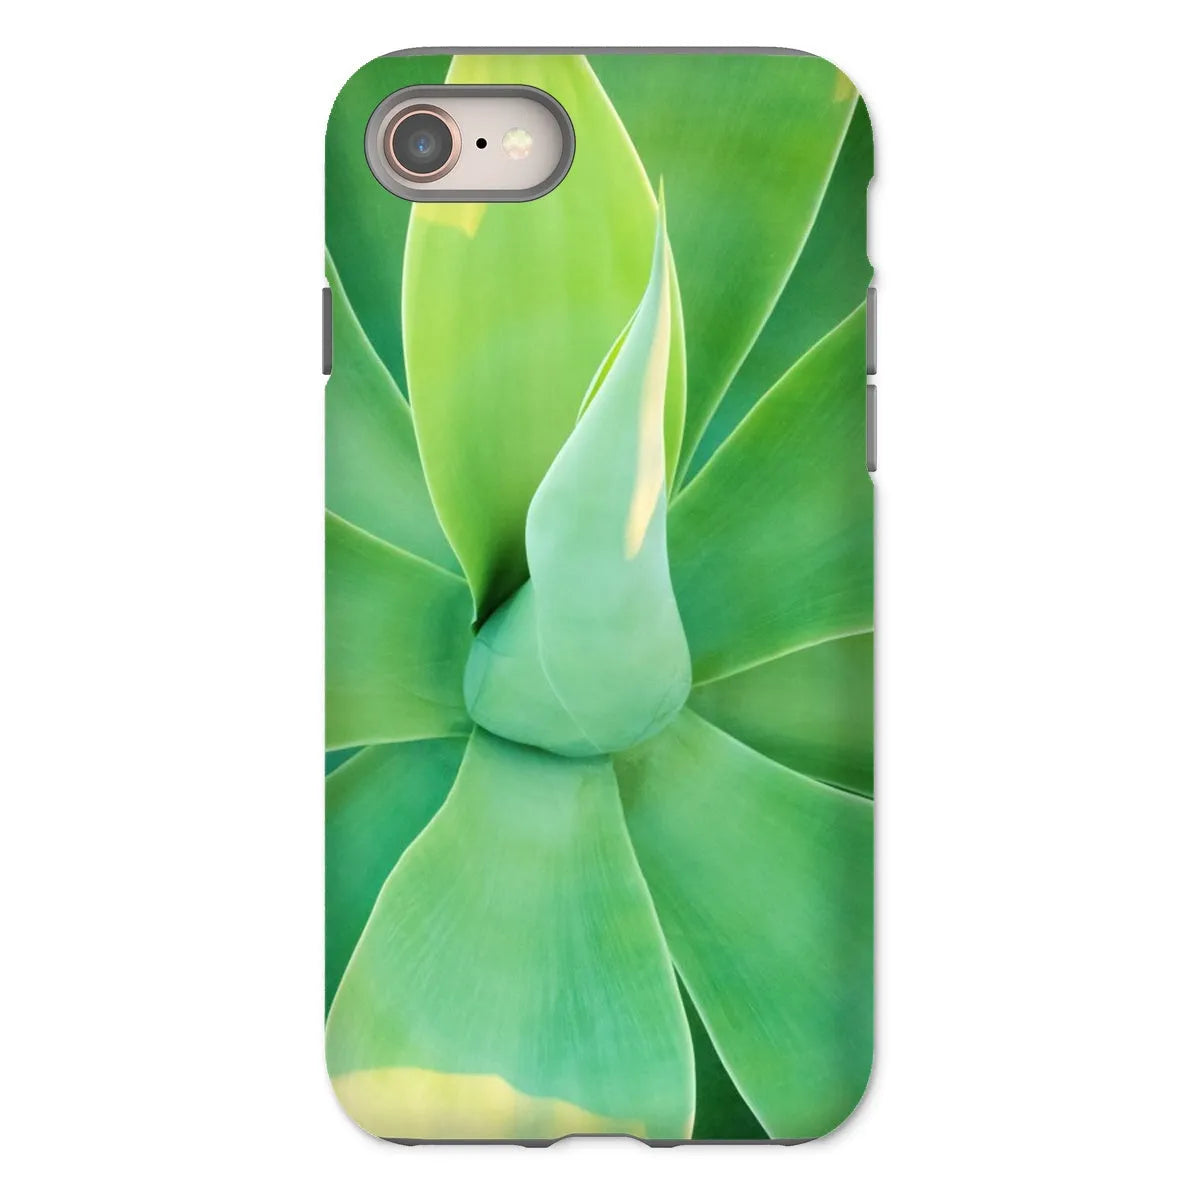 In Bloom Too Tough Phone Case - Iphone 8 / Matte - Mobile Phone Cases - Aesthetic Art